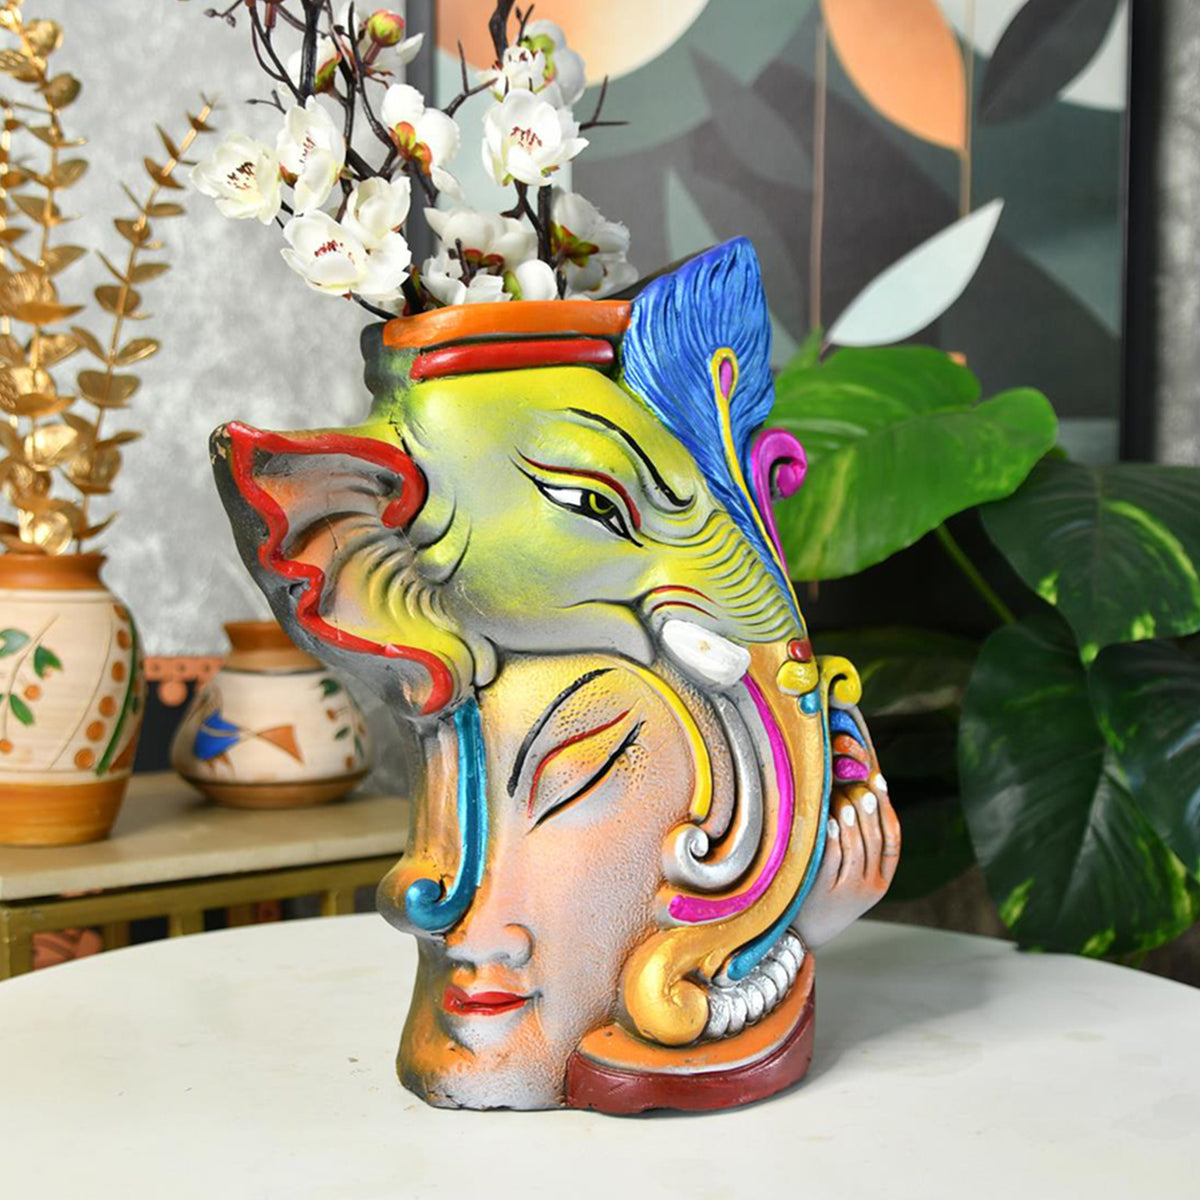 Premium Terracotta Abstract Flower Vase with Bright Colors